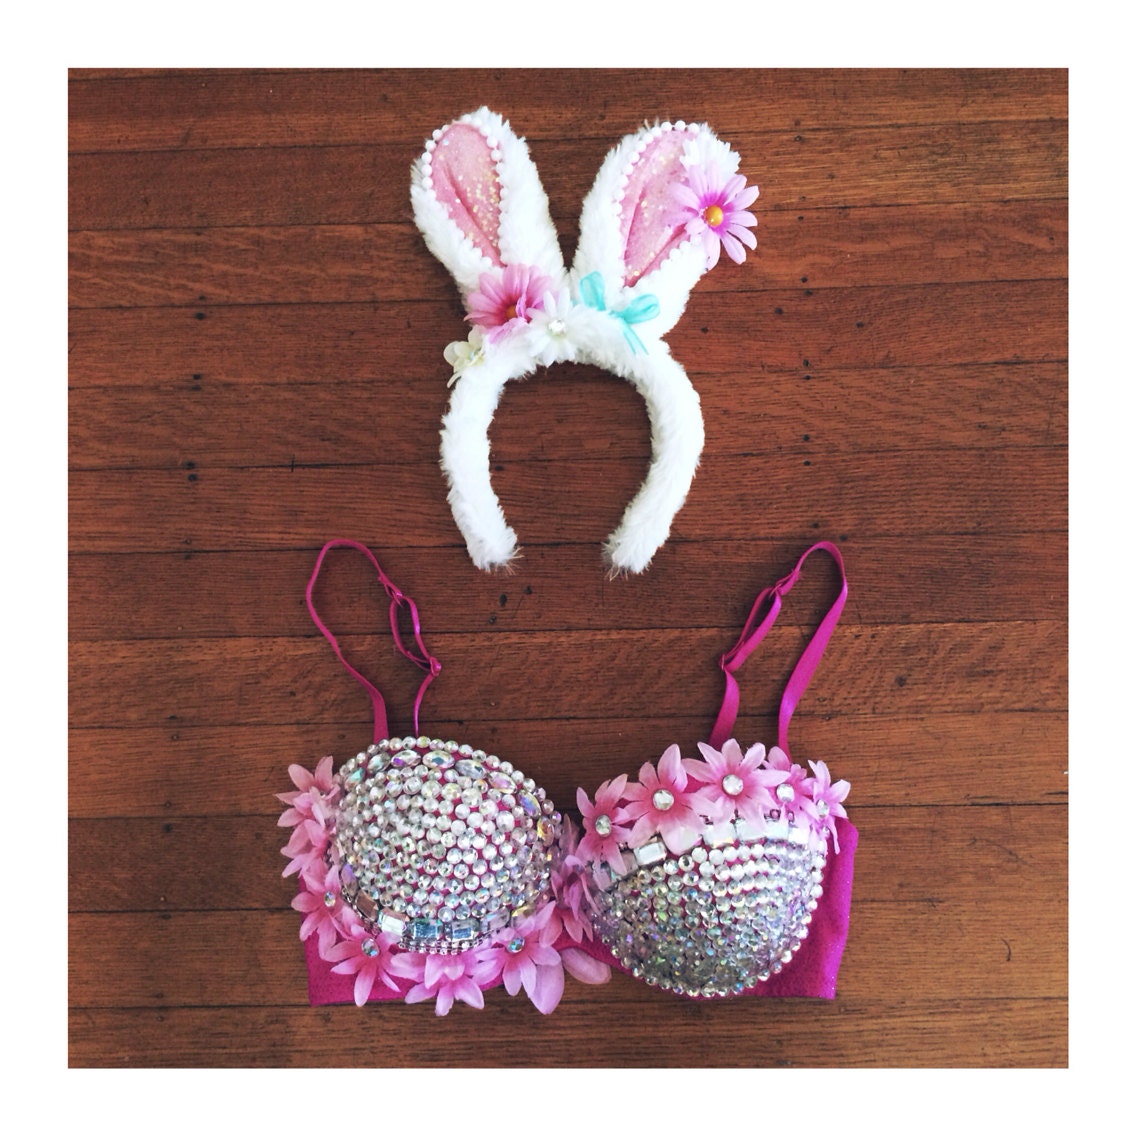 Rave Bra Rave Outfit Pink Rave Bunny Bra And Ears 34c